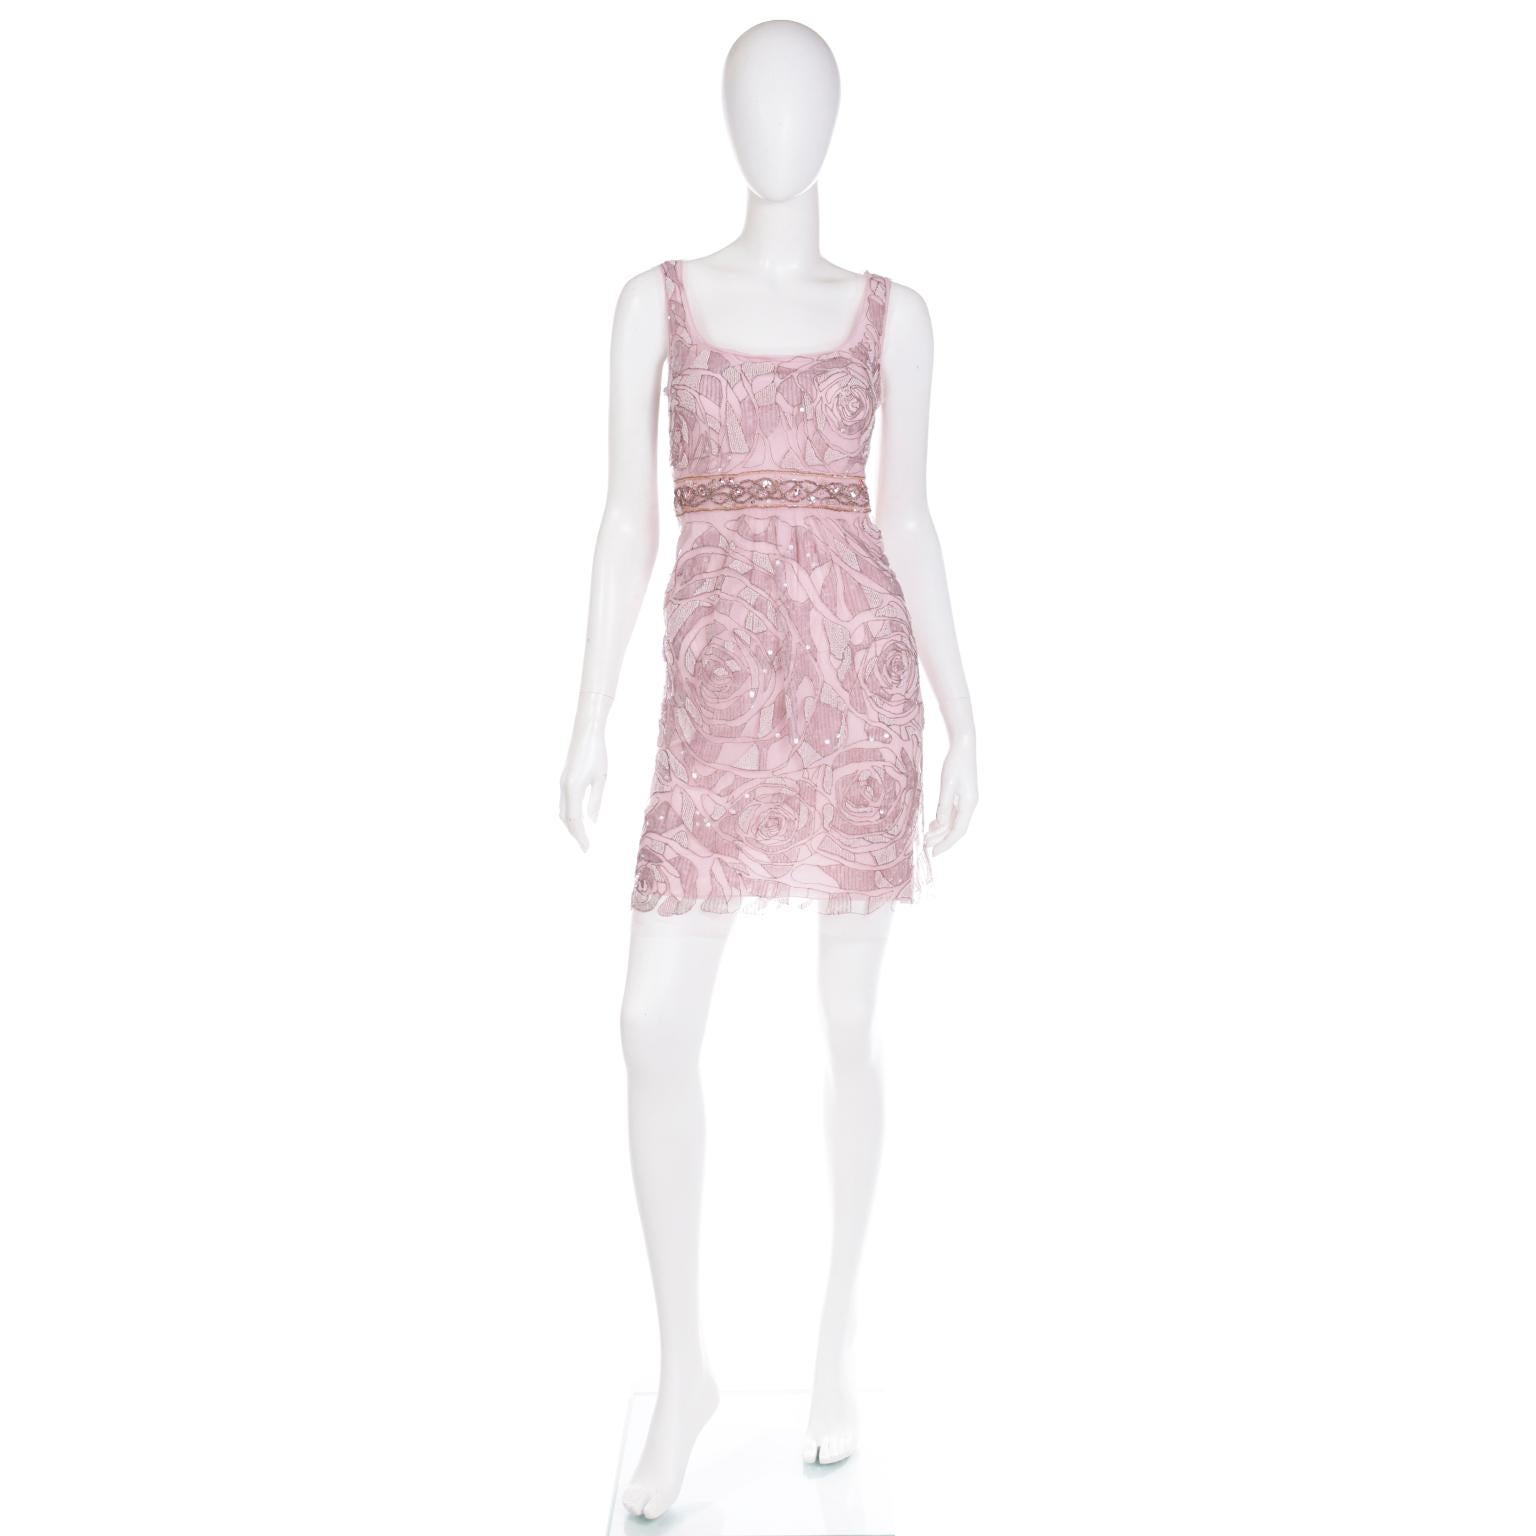 This pretty vintage Emanuel Ungaro beaded evening dress has a 100% silk pink under dress and a delicate nylon net overlay that is perfectly embellished with metallic embroidery, beads and iridescent sequins. The embroidery and beads form giant